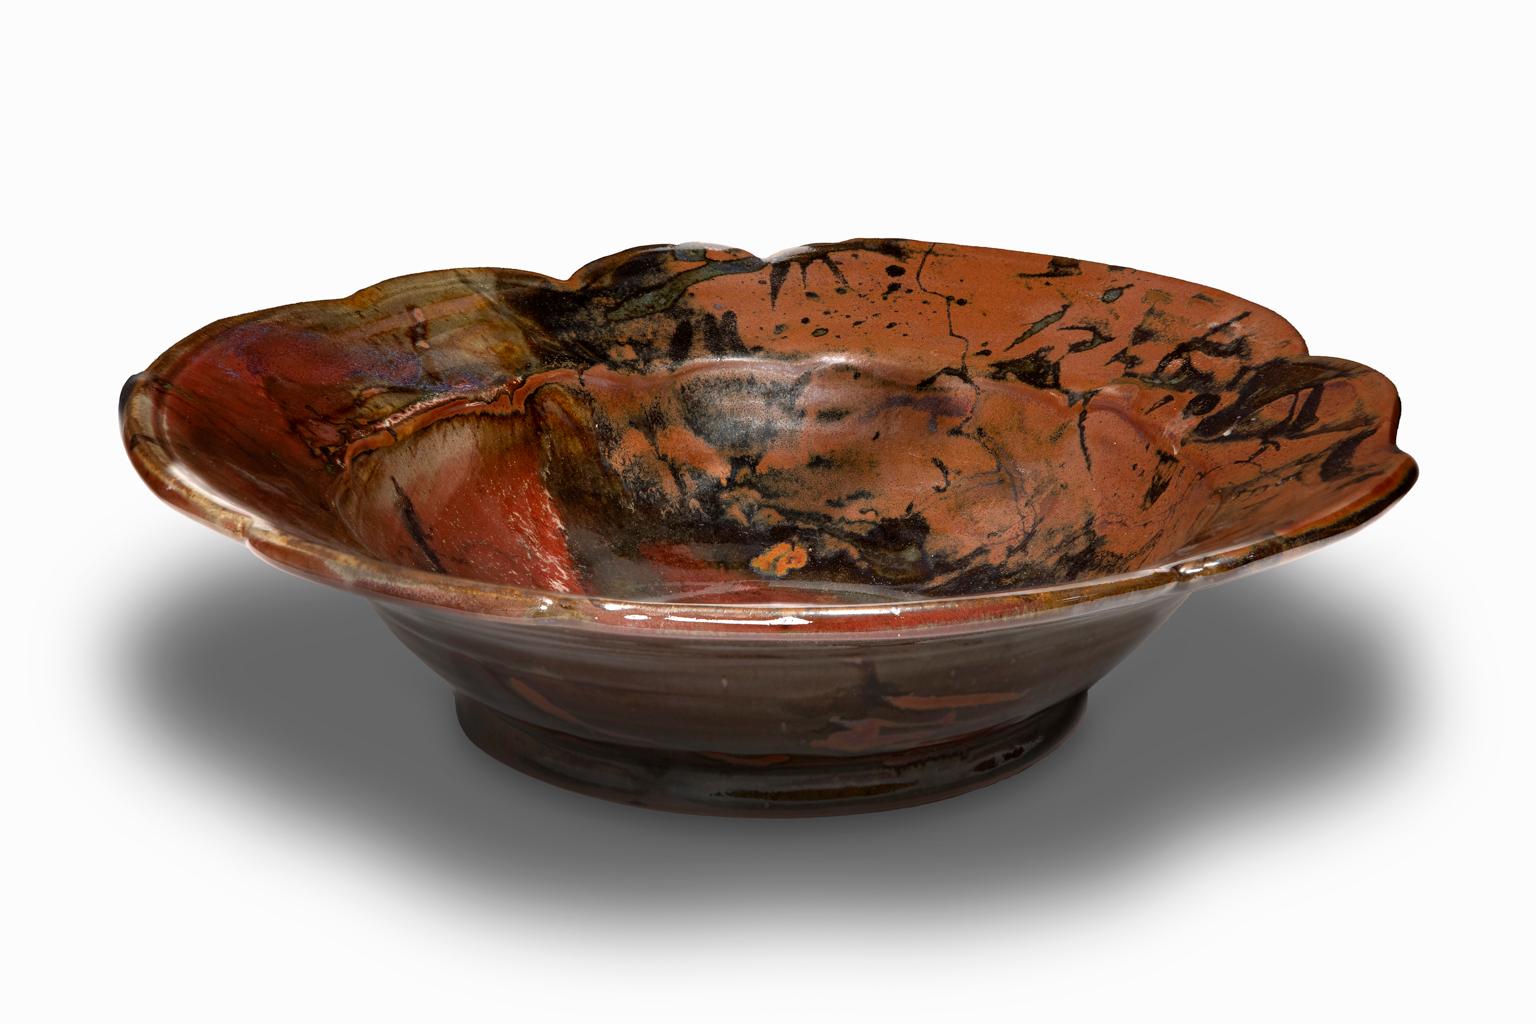 American John Glick Plum Street Pottery Ceramic Glazed Bowl/Charger Extra-large  For Sale